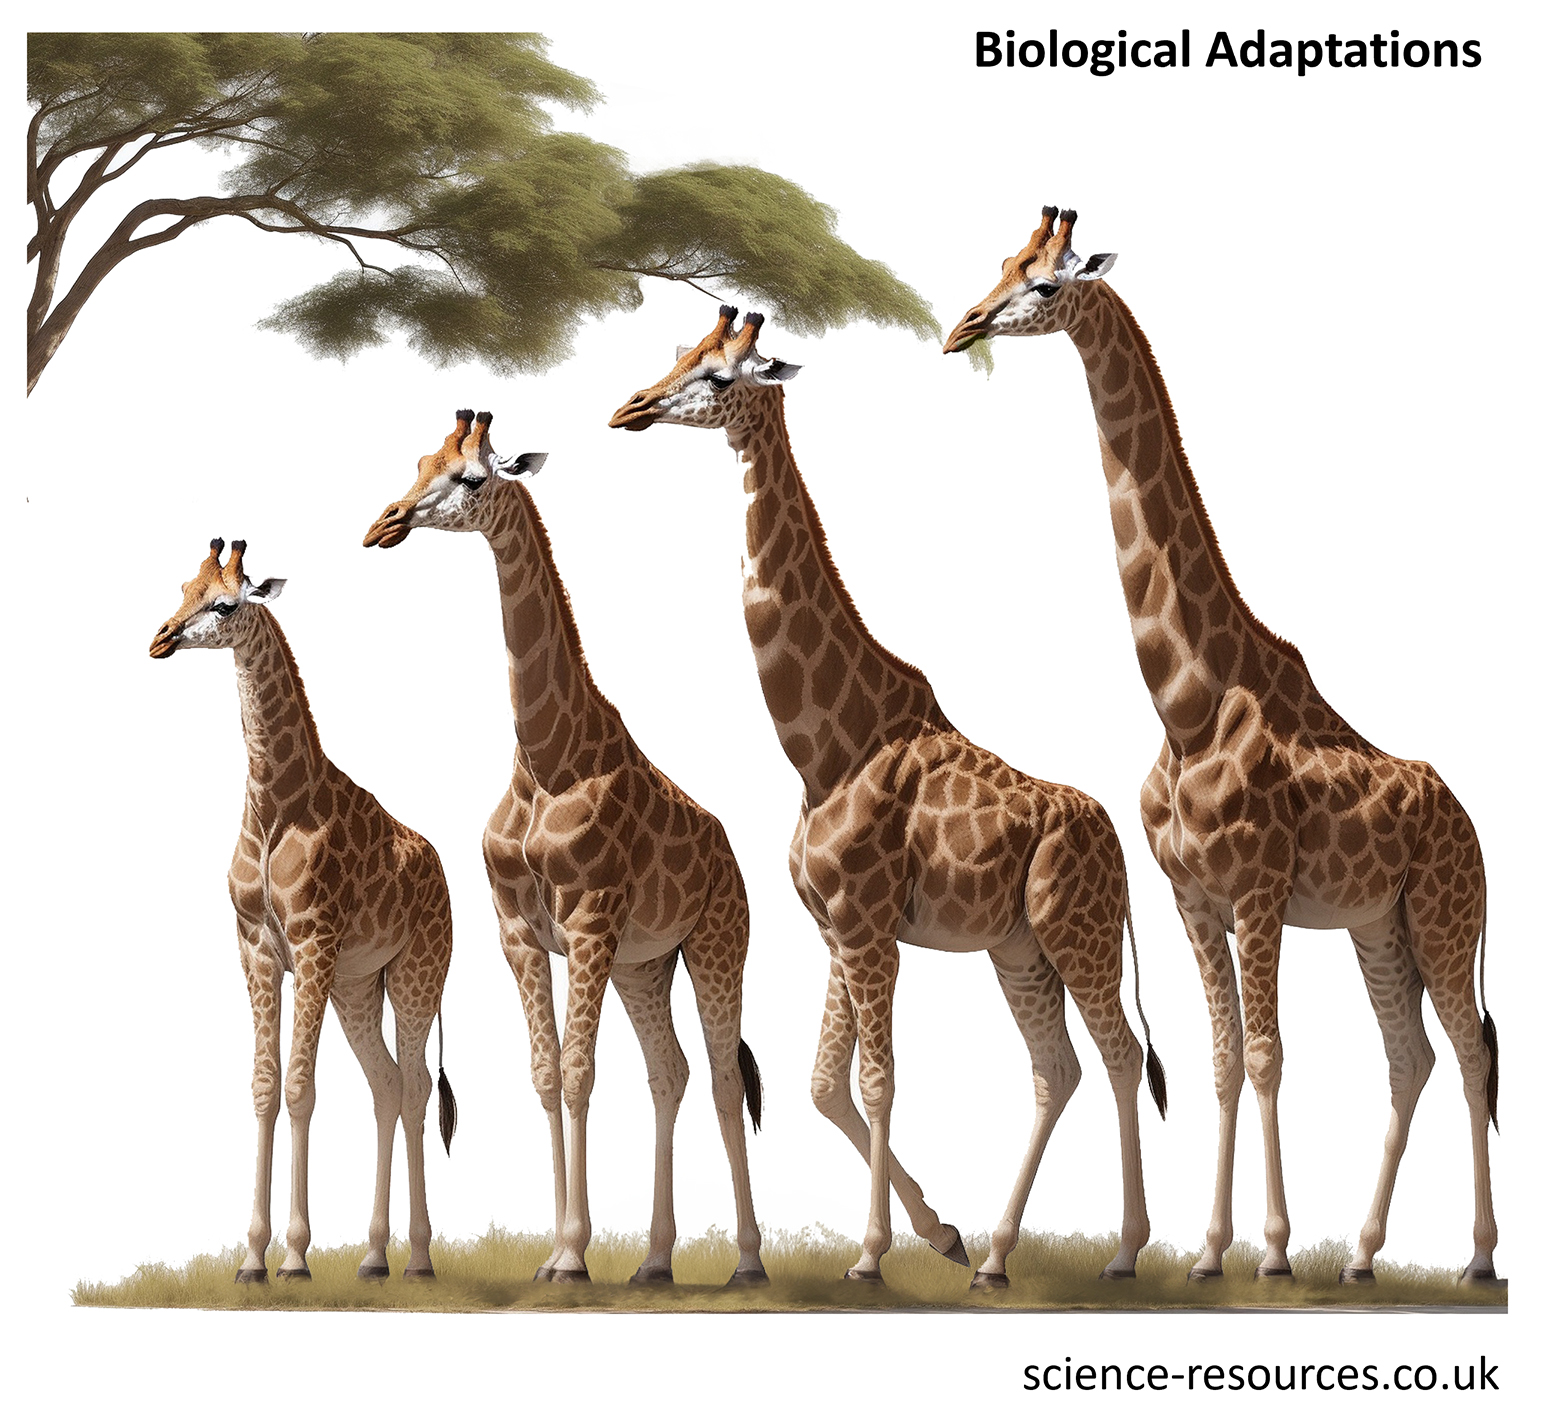 Image showing biological adaptations in giraffes.
The image features four giraffes of varying heights, standing in a line under a tree with sparse, green foliage. It shows  how certain traits, like the giraffe’s neck, have evolved to suit their environment.